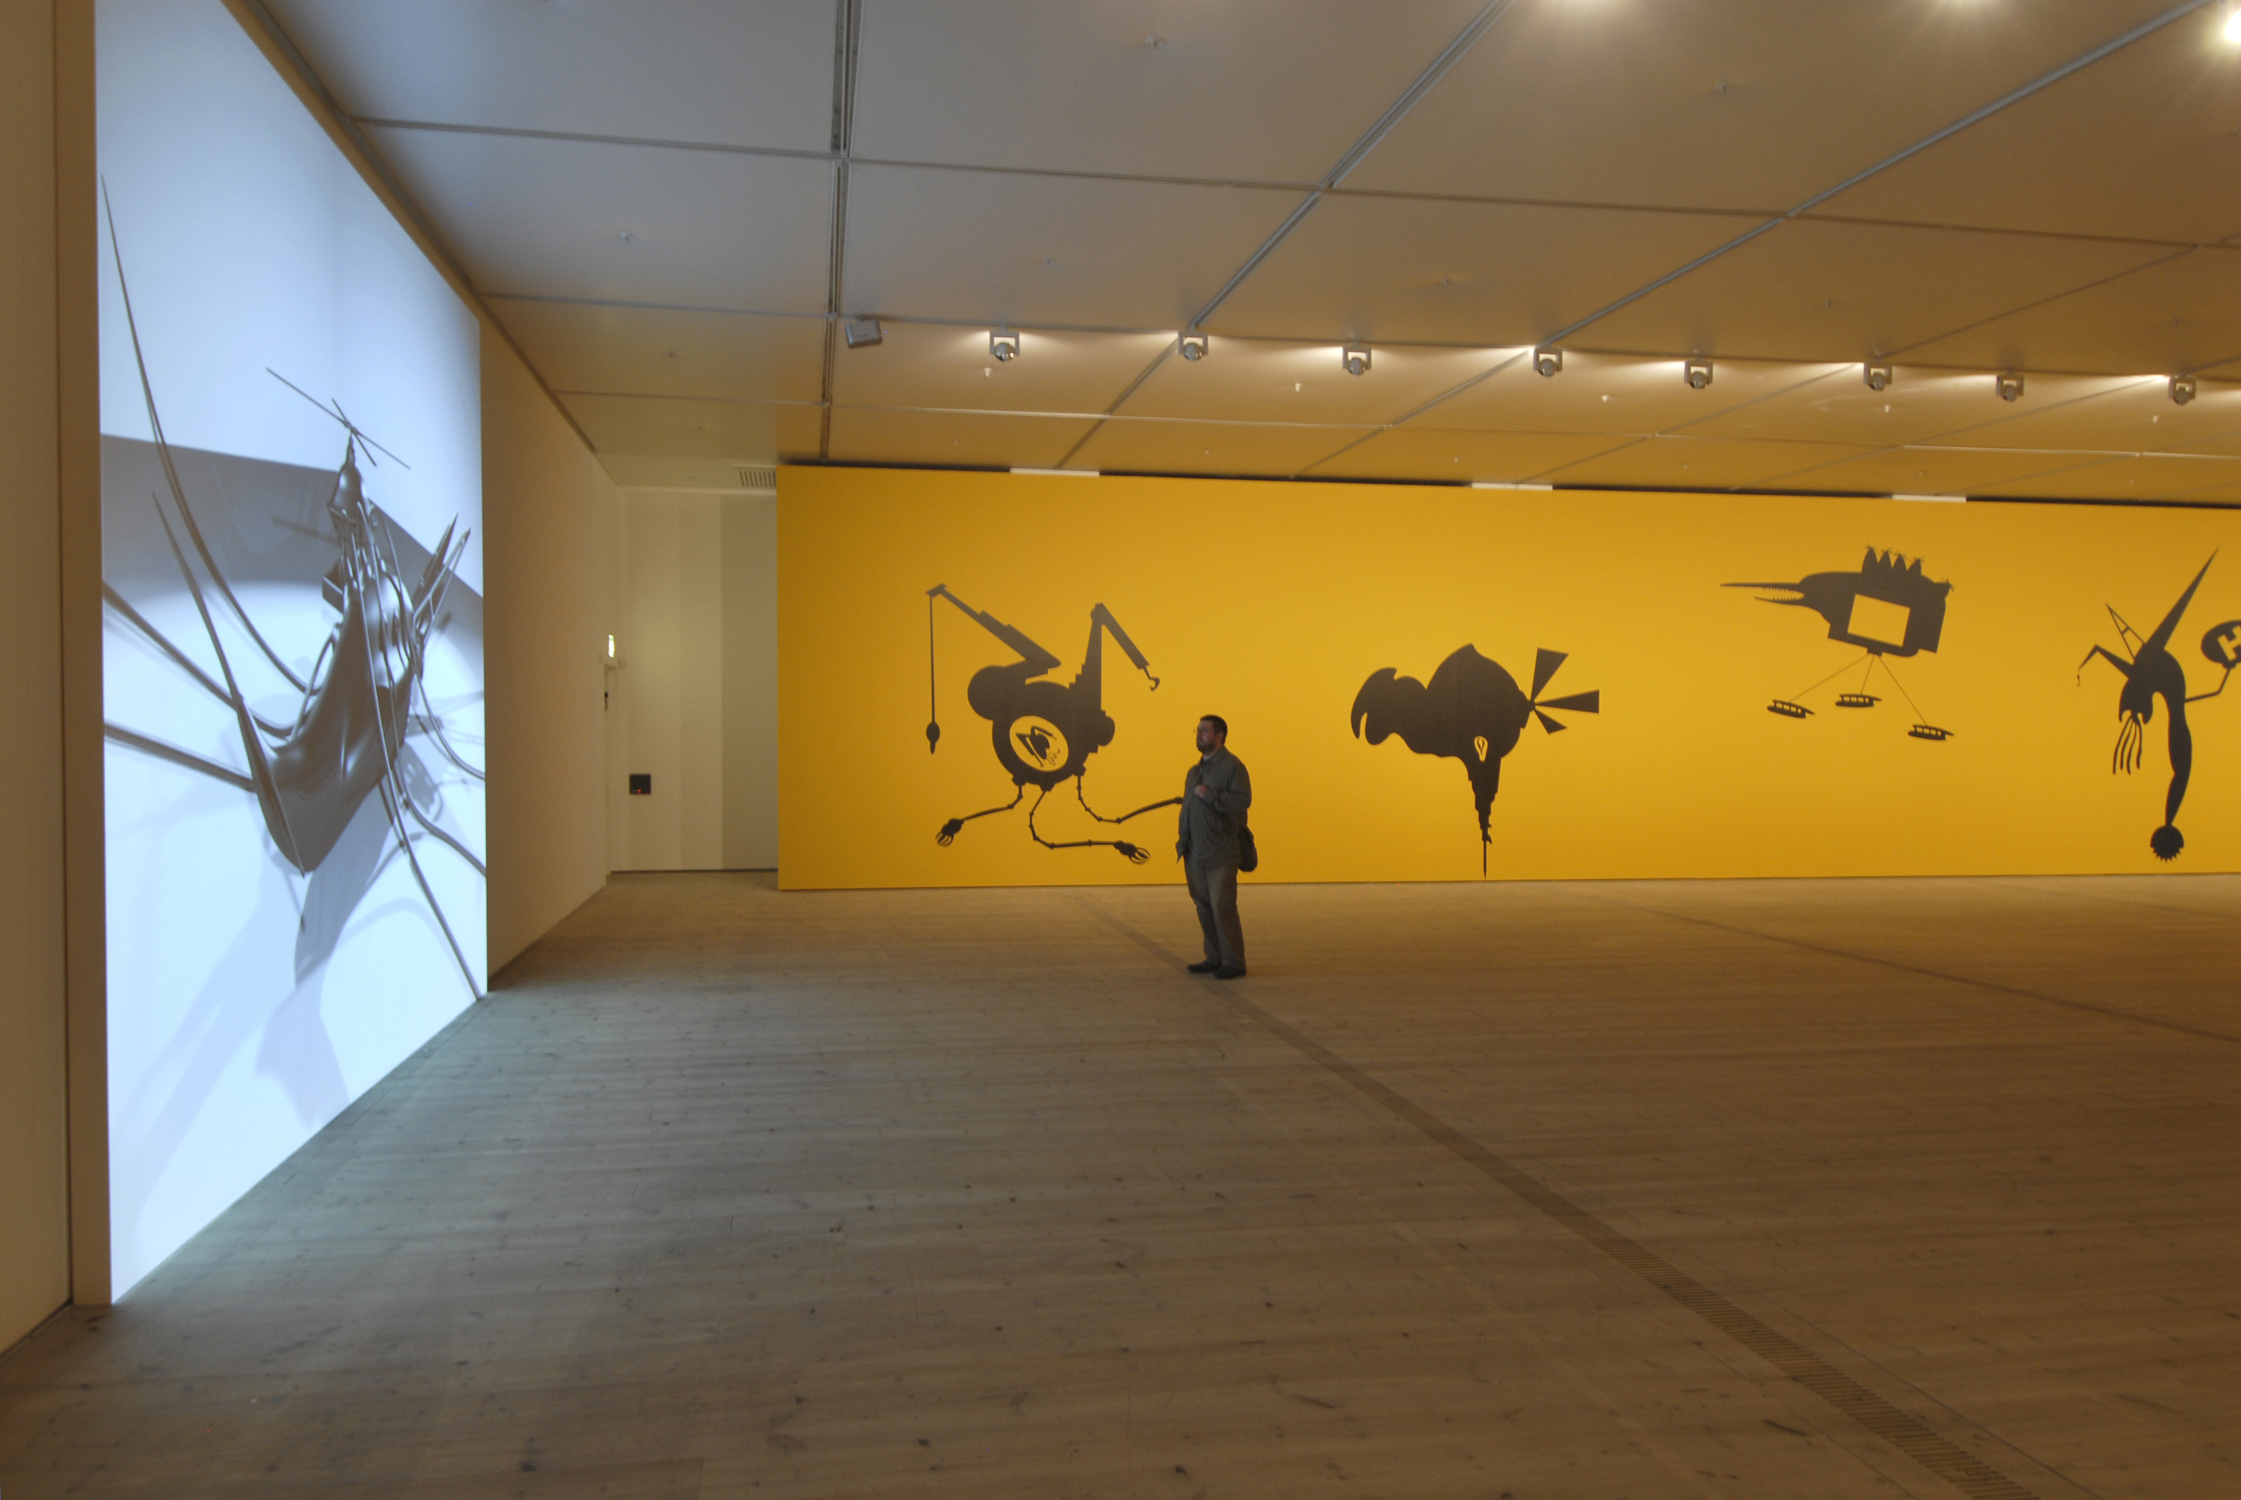  The Bride Stripped Bare by Her Energy's' Evil, 2006, two large scale wall paintings (10 m each + acrylic colors), audio elements and a projected short 3D animated film, 2 min. 44 sec. Installation view at BALTIC Centre for Contemporary Art, Gateshea